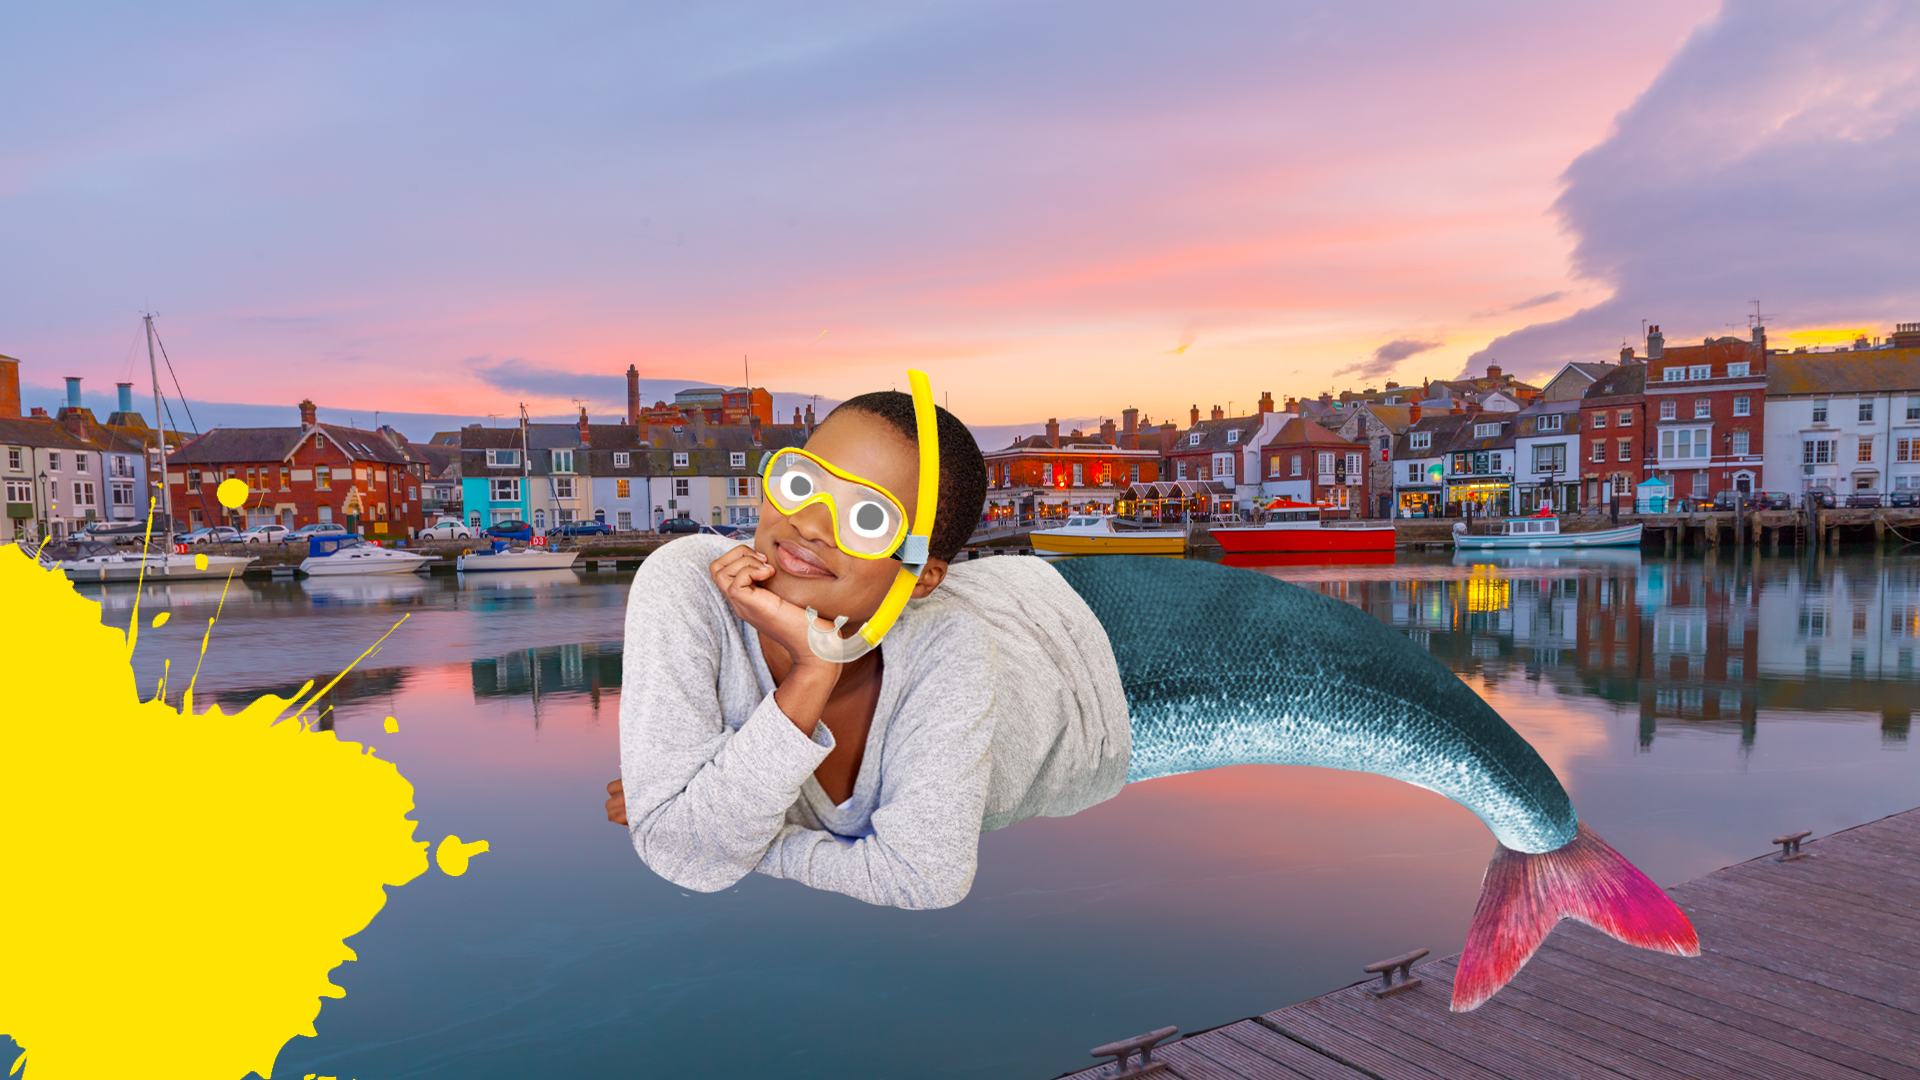 Weymouth harbour with Beano splat and mermaid 